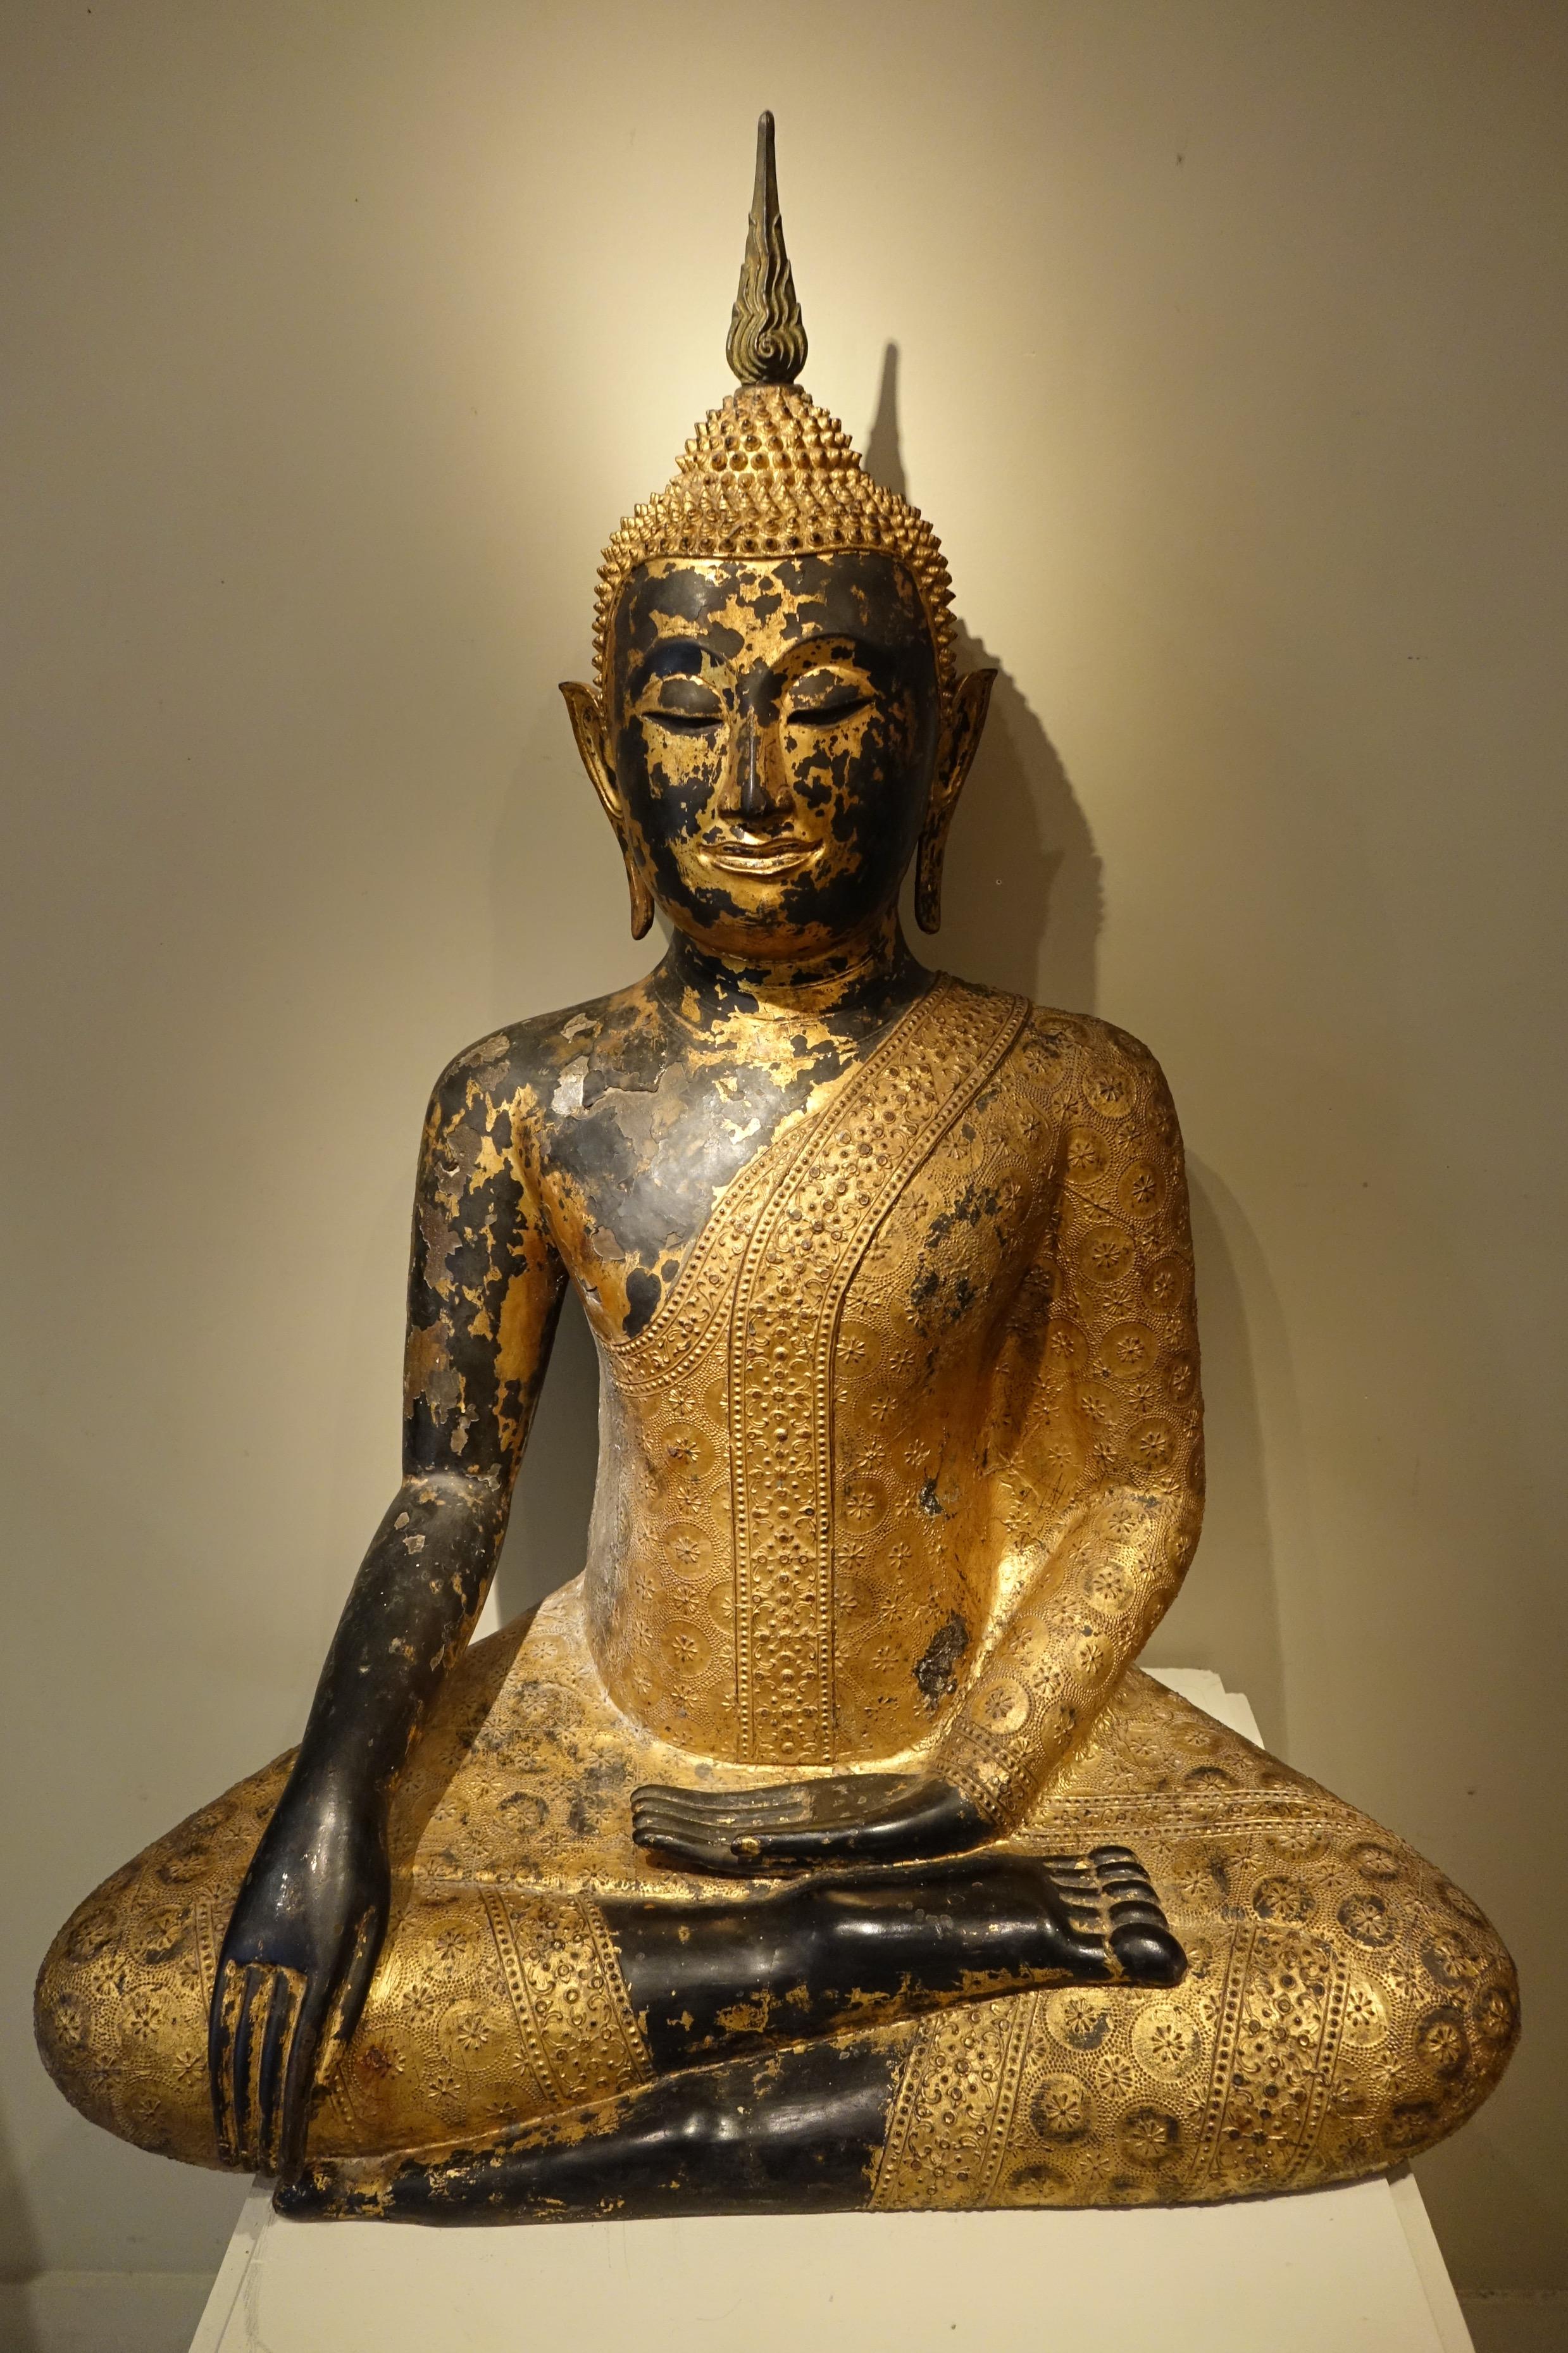 Very Large Buddha seated in Bhumisparsa mùdra, or gesture of taking the earth as witness.
Buddha calls the earth goddess to witness that he has definitively overcome the fears and temptations sent by Mara, the demon of illusion, under the Bodhi